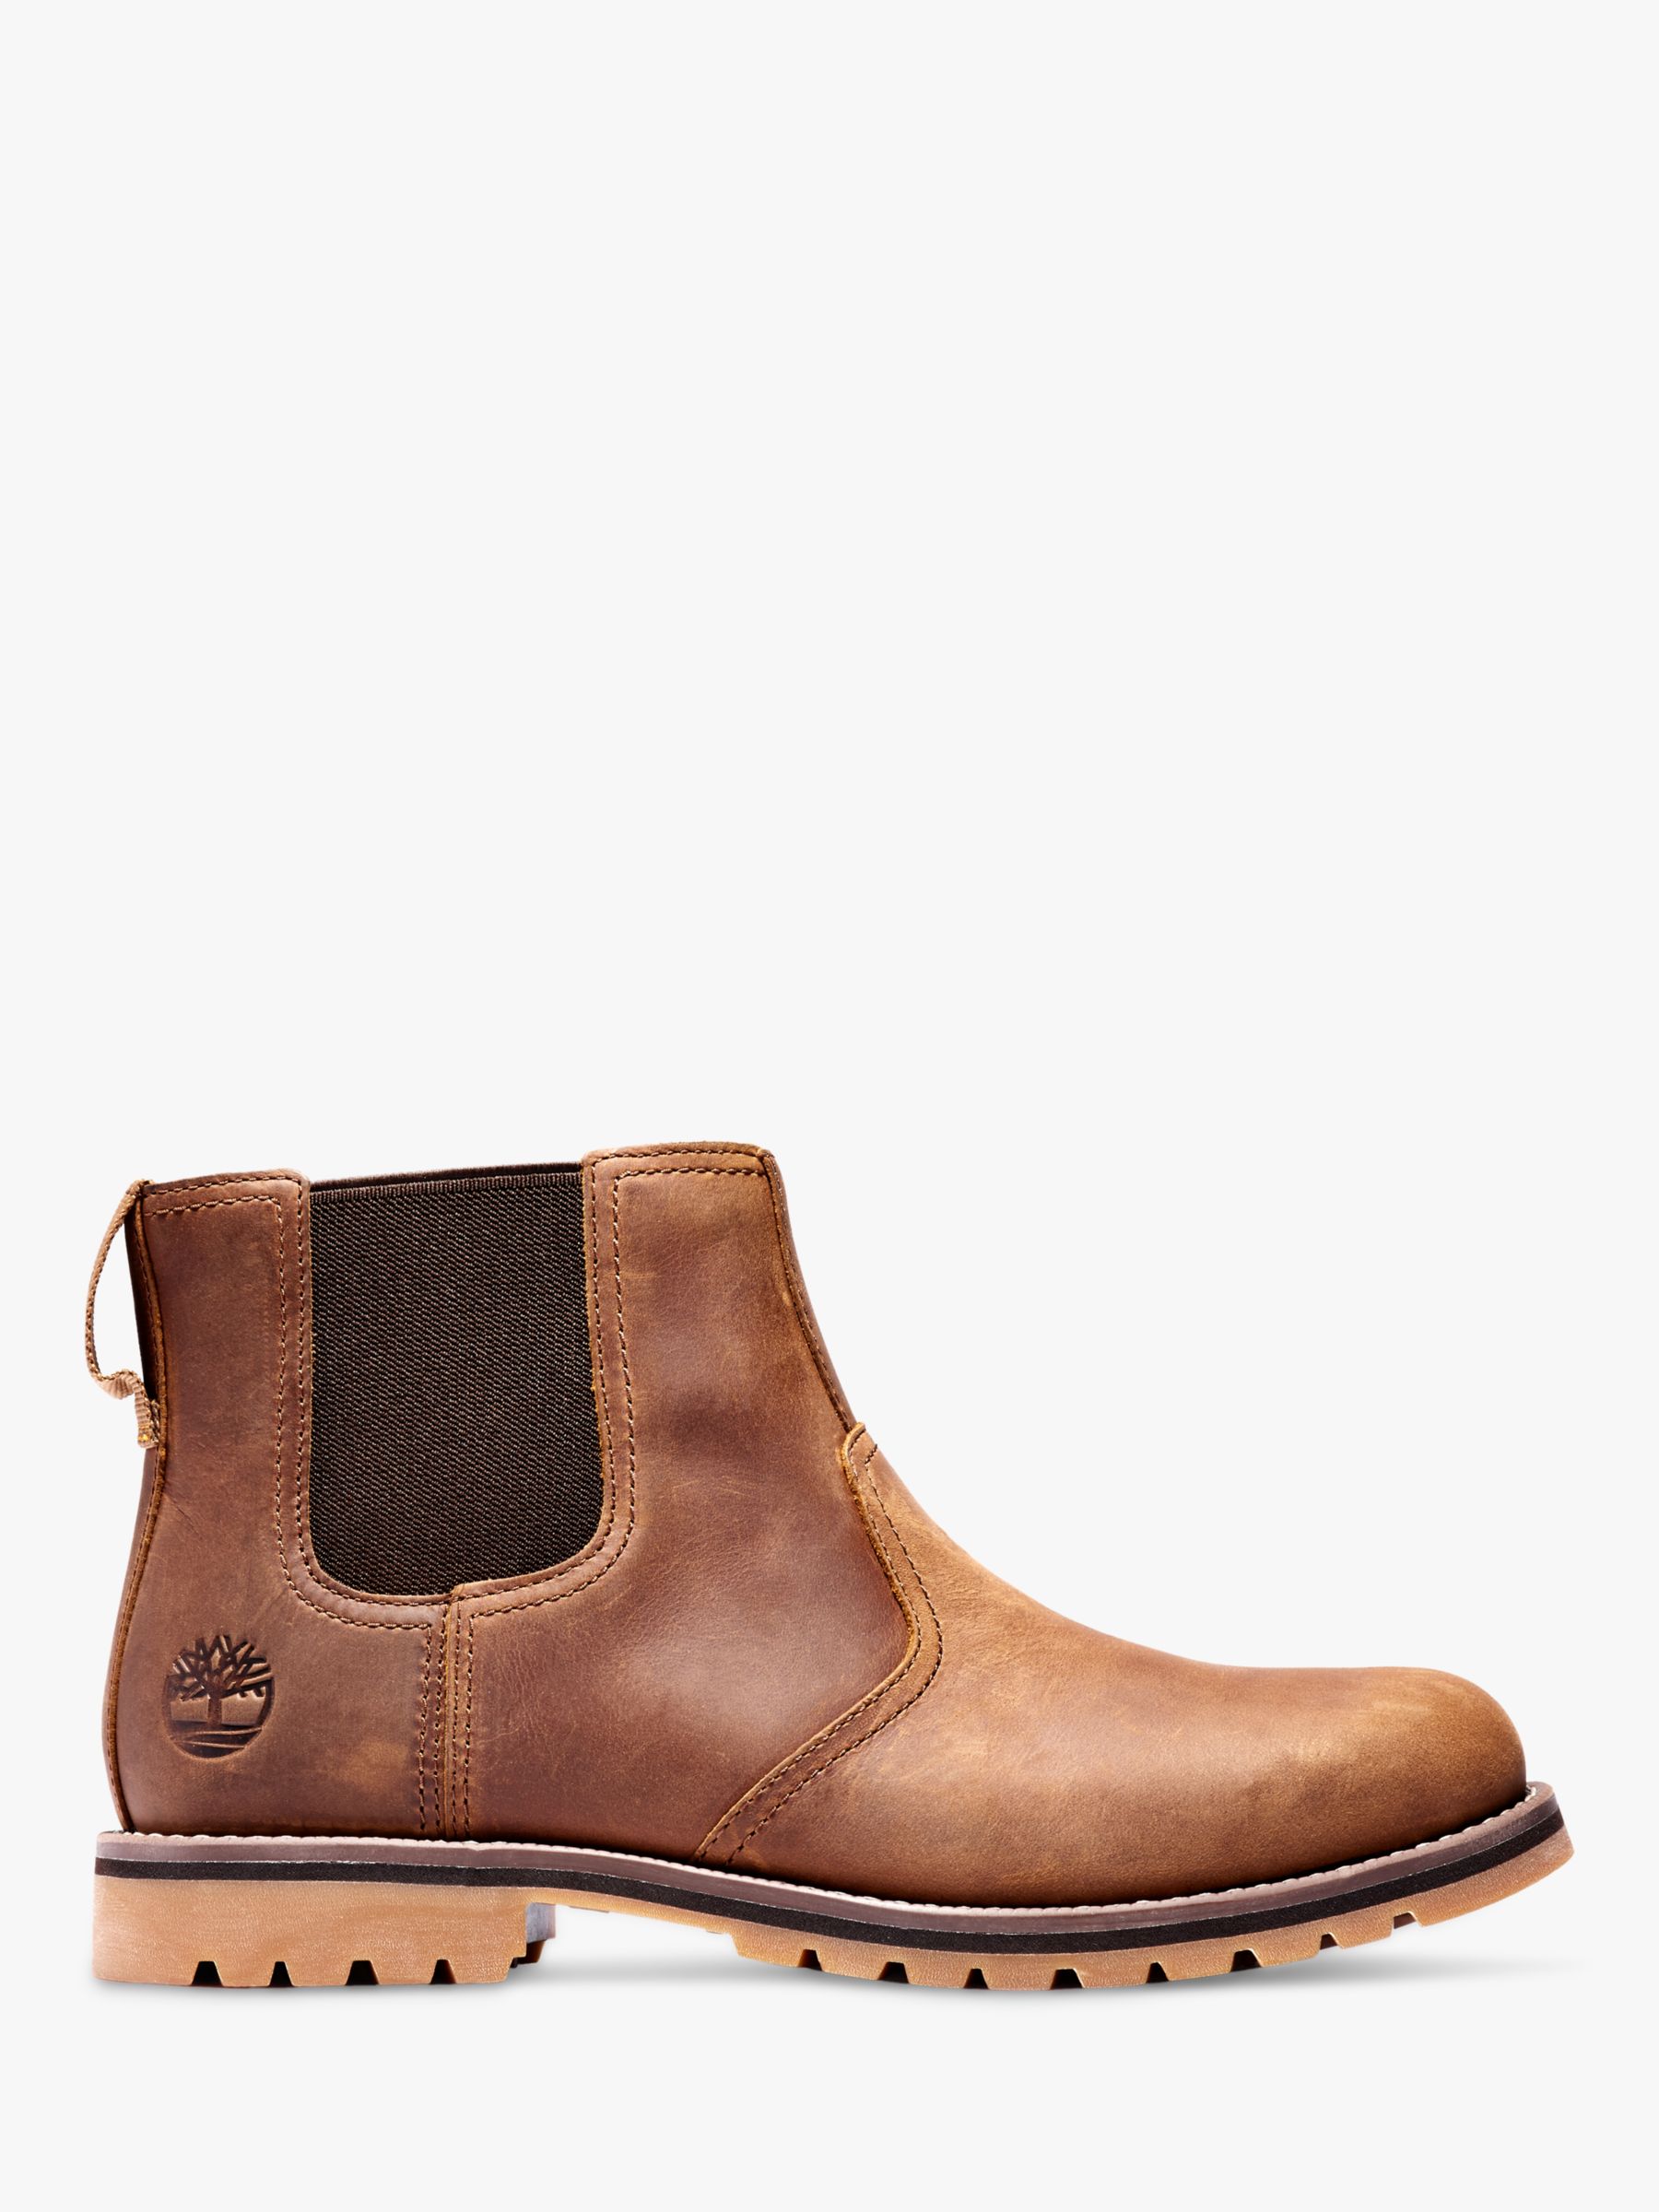 Timberland Leather Chelsea Boots, Rust at John Lewis & Partners